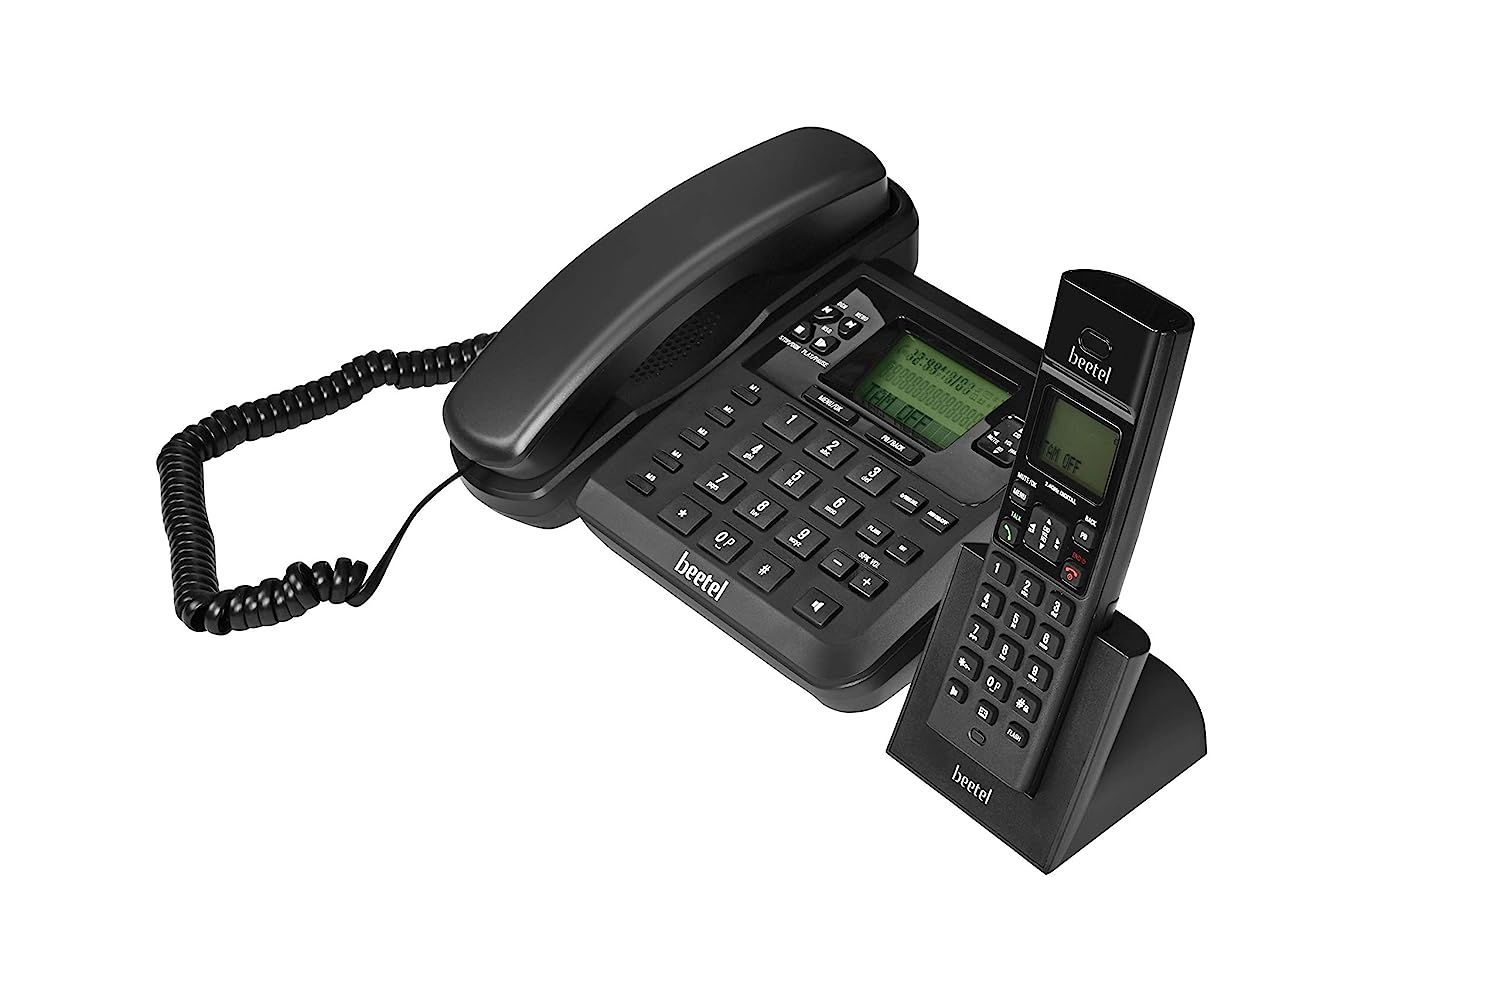 Beetel X78 2.4GHz Cordless Combo, with 2 Way Speaker Phone for Both Base and Handset, 3 Way Call conferencing, 8hrs Talk Time and 4 Days stand by, Stylish & Sturdy for Both Home and Office (X78 Black) - Mahajan Electronics Online